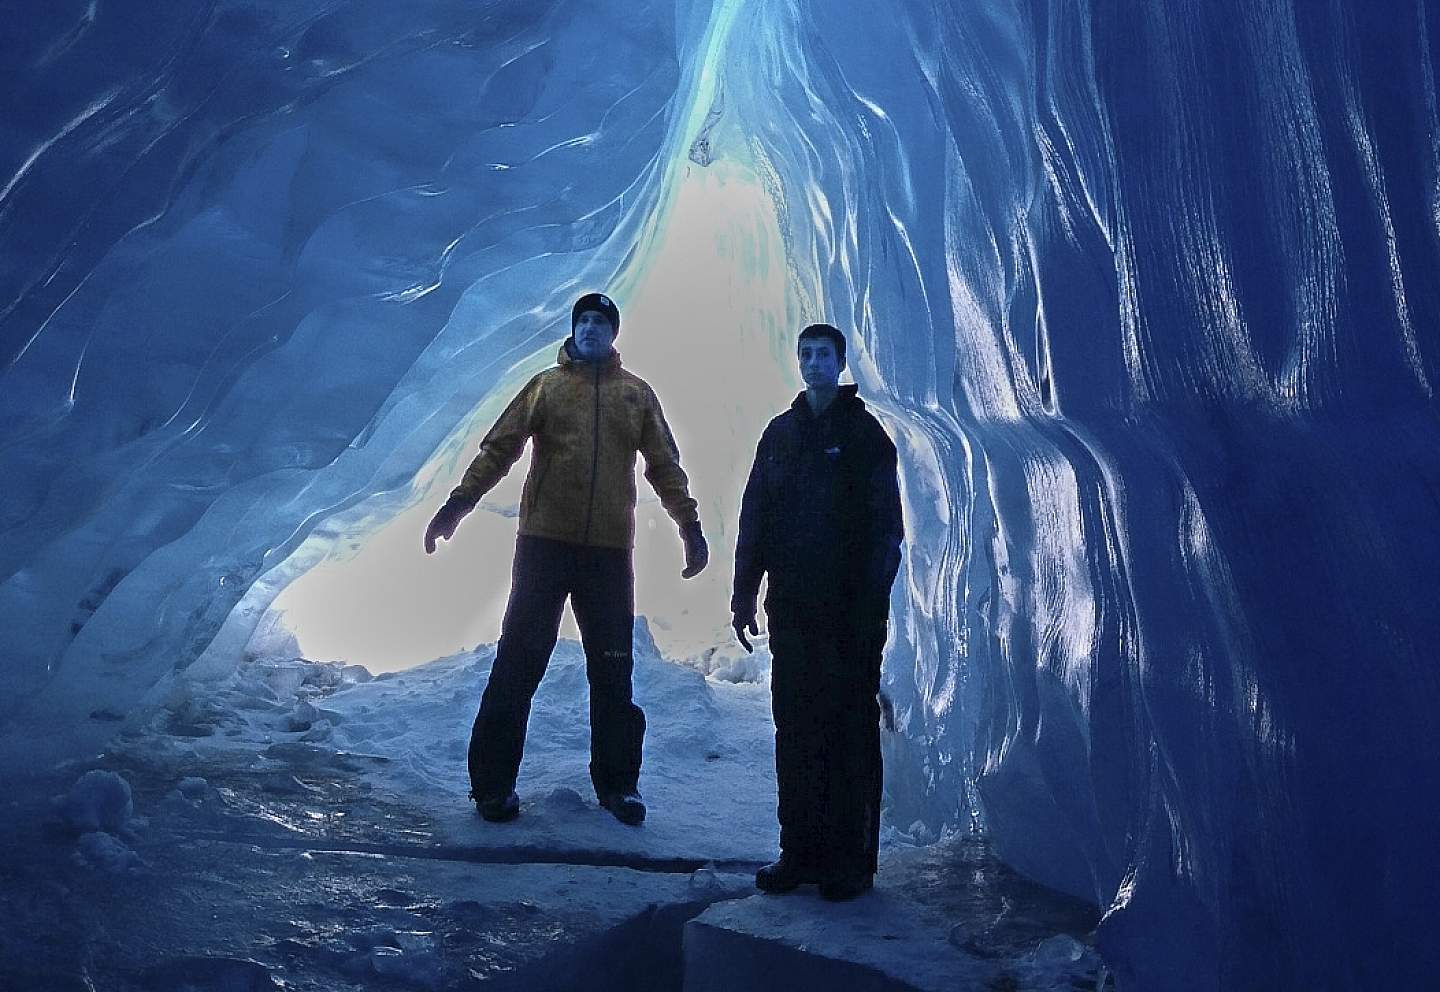 If conditions permit, discover the ice caves of Spencer Glacier